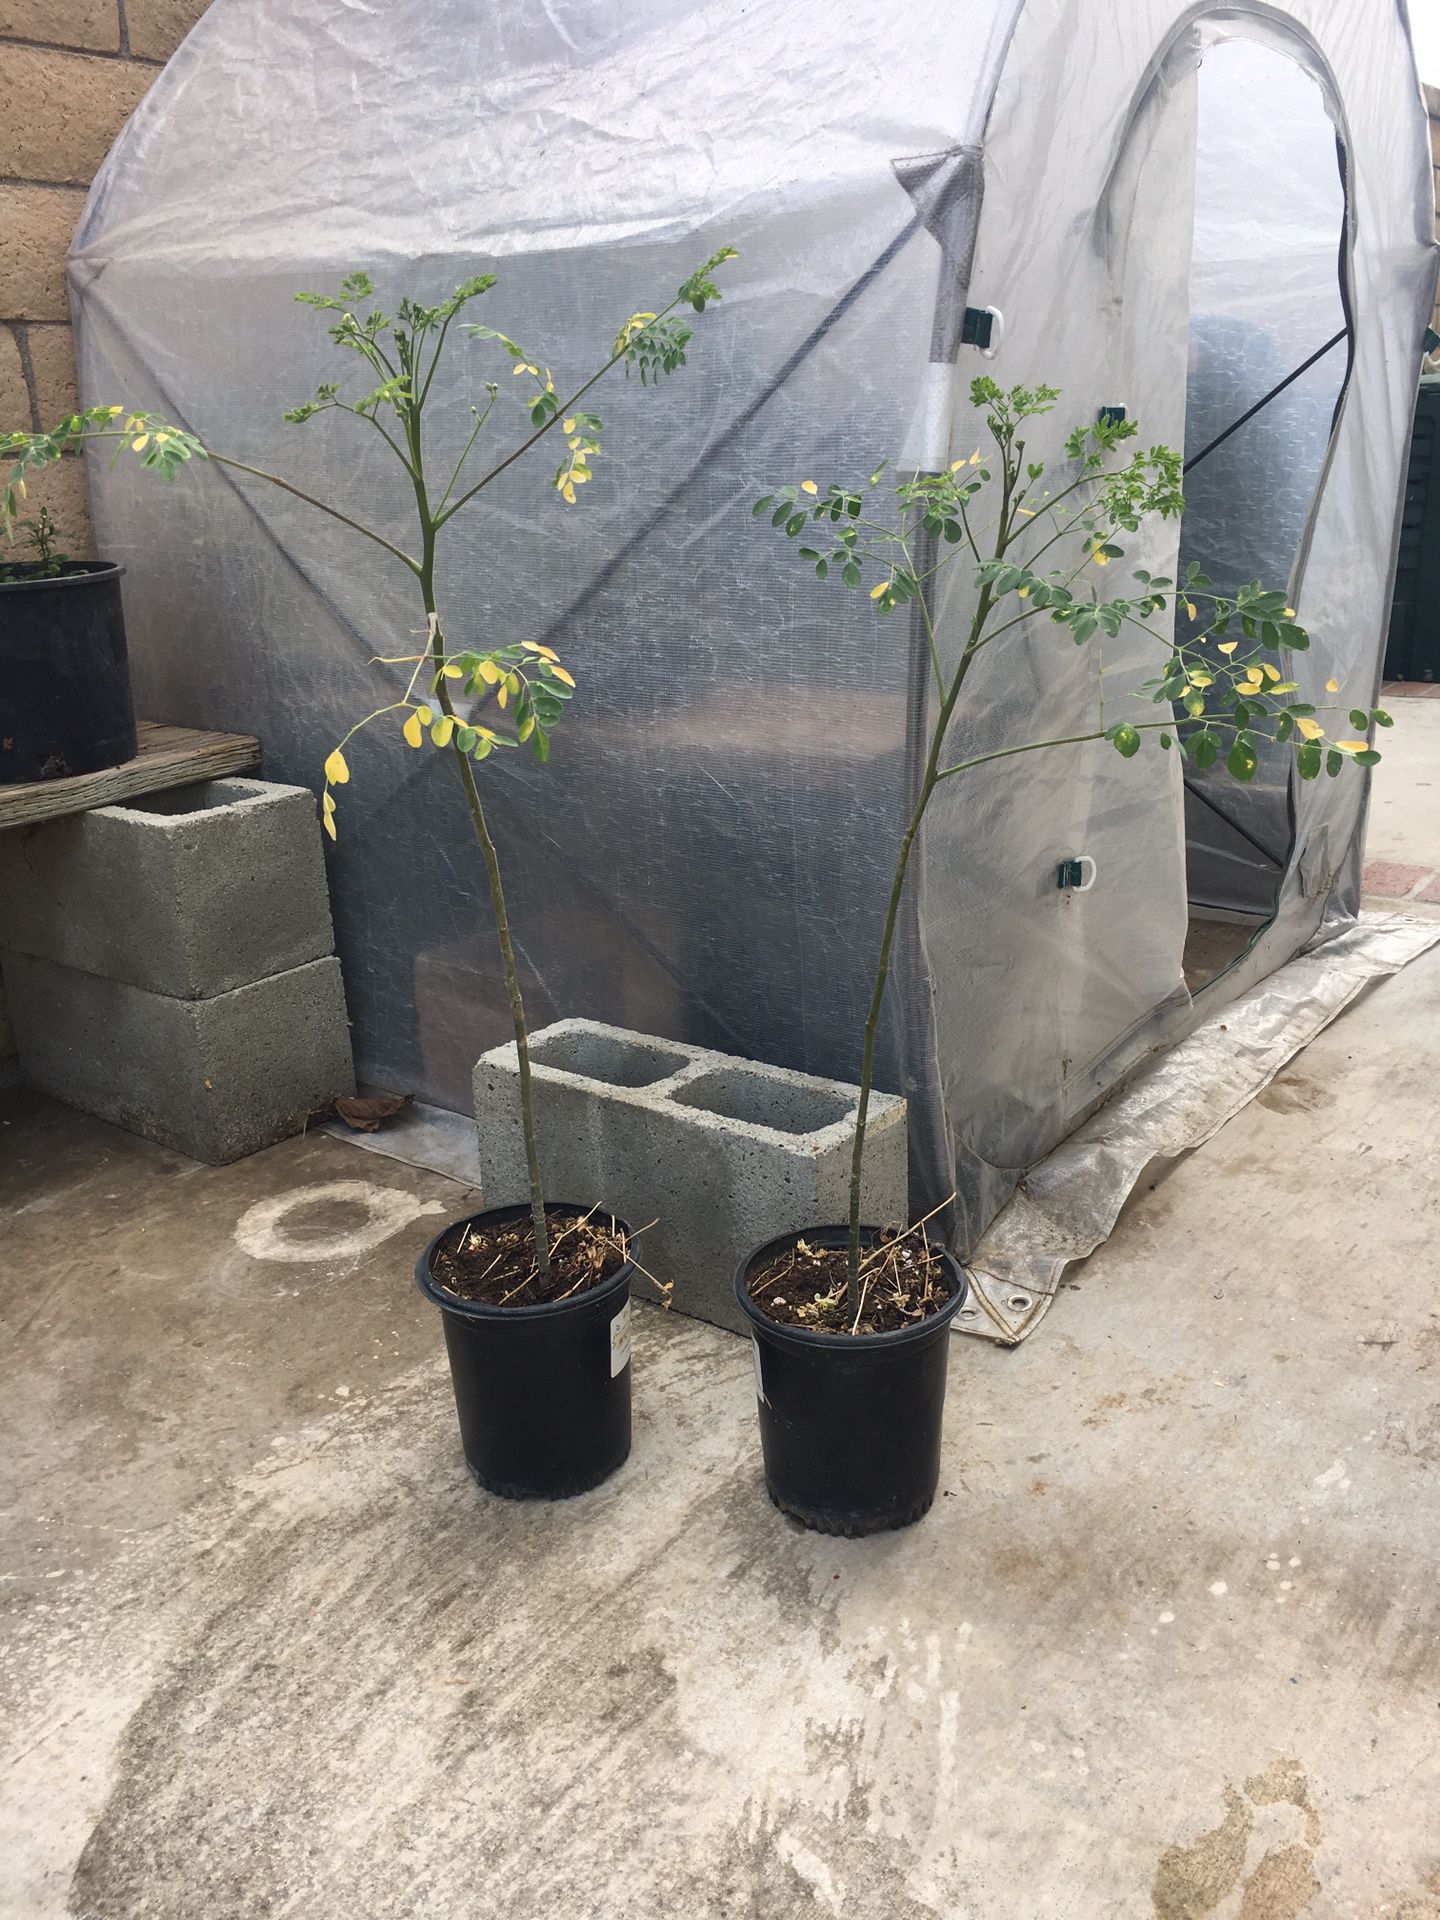 Two very healthy Marego plants in 6 inch pots $10 each